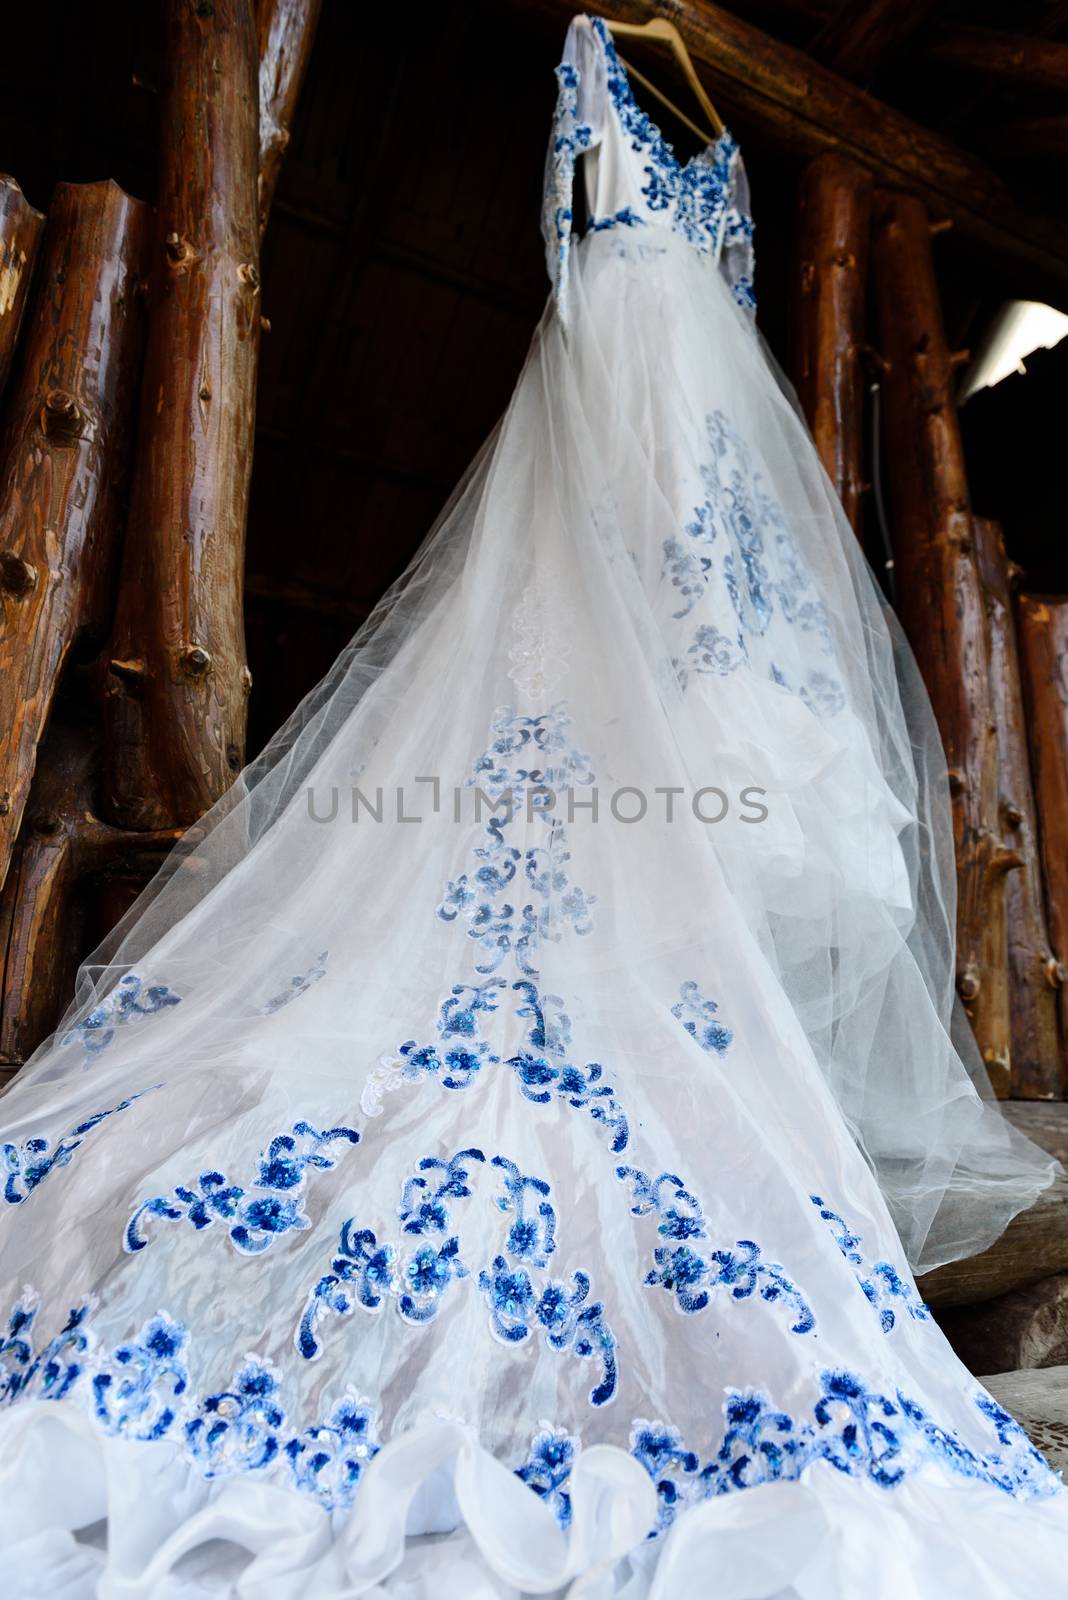 bridesmaid dress in the style of Gzhel hanging on a wooden beam in the input aperture of the house